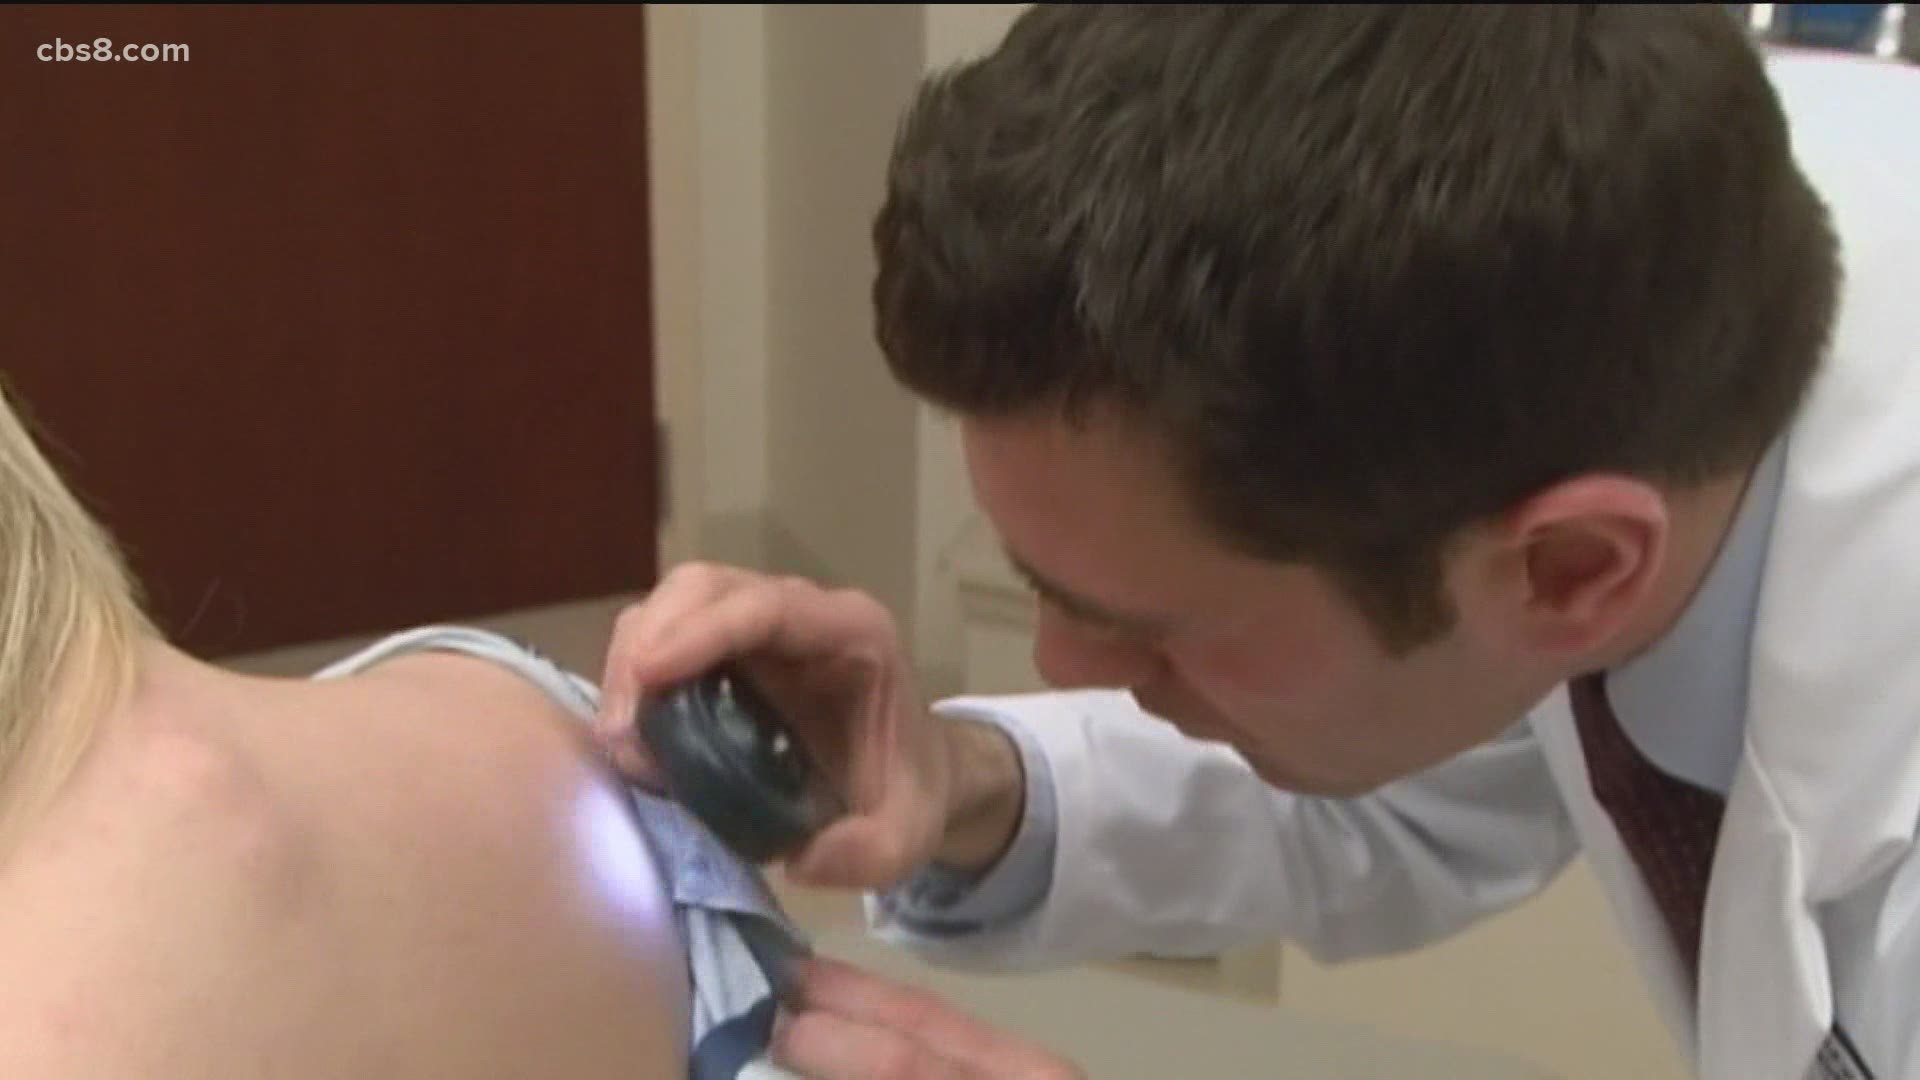 There is an increasing case of melanoma in the elderly. Dr. Hugh Greenway, with Scripps MD Anderson Cancer Center, shares the importance of getting checked.